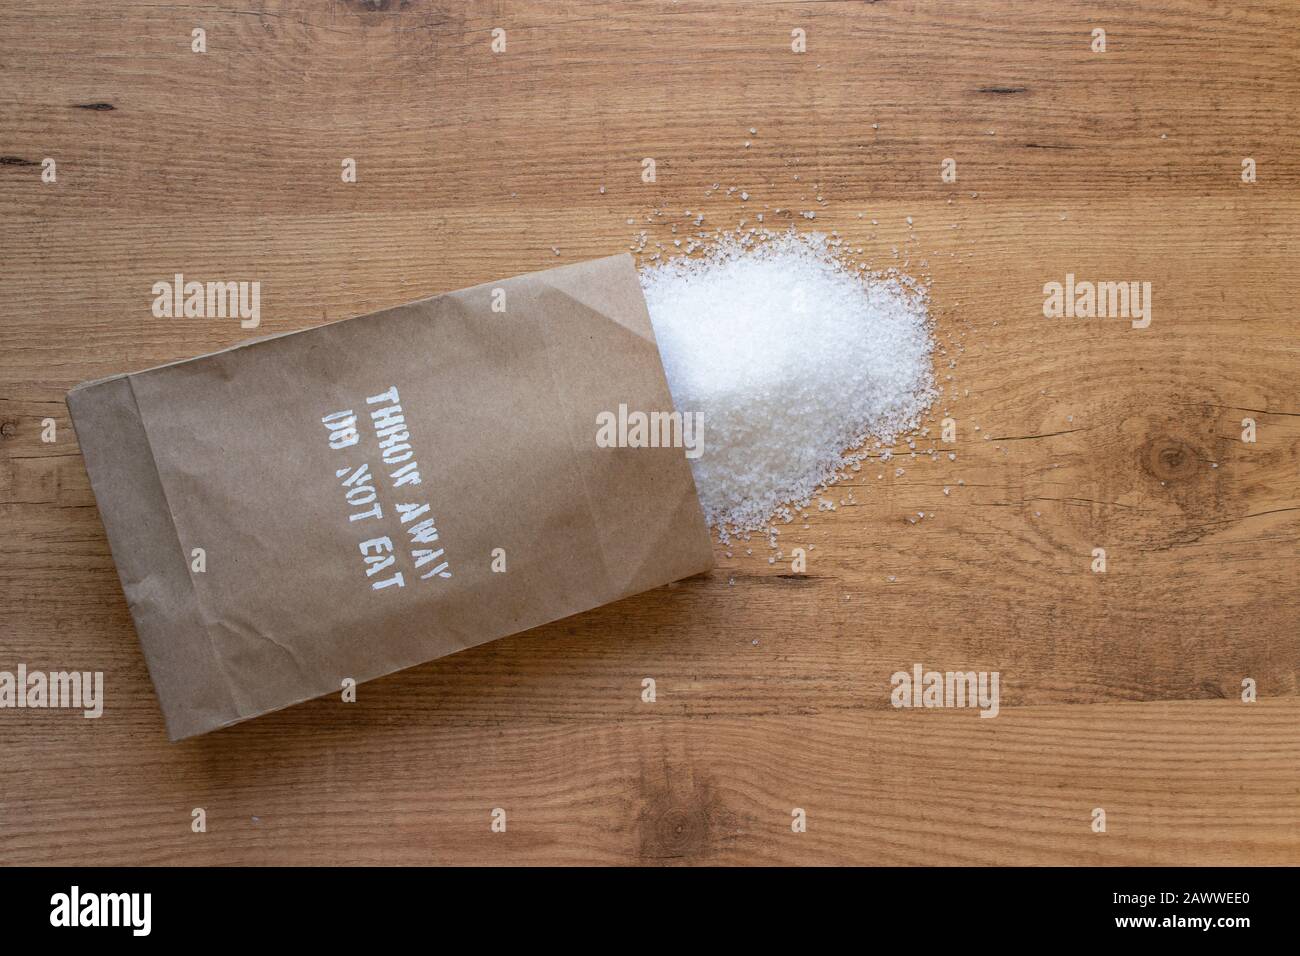 Salt in the paper pack on the table. 'Throw away, do not eat' added salt intake health warning on the packet. Stock Photo